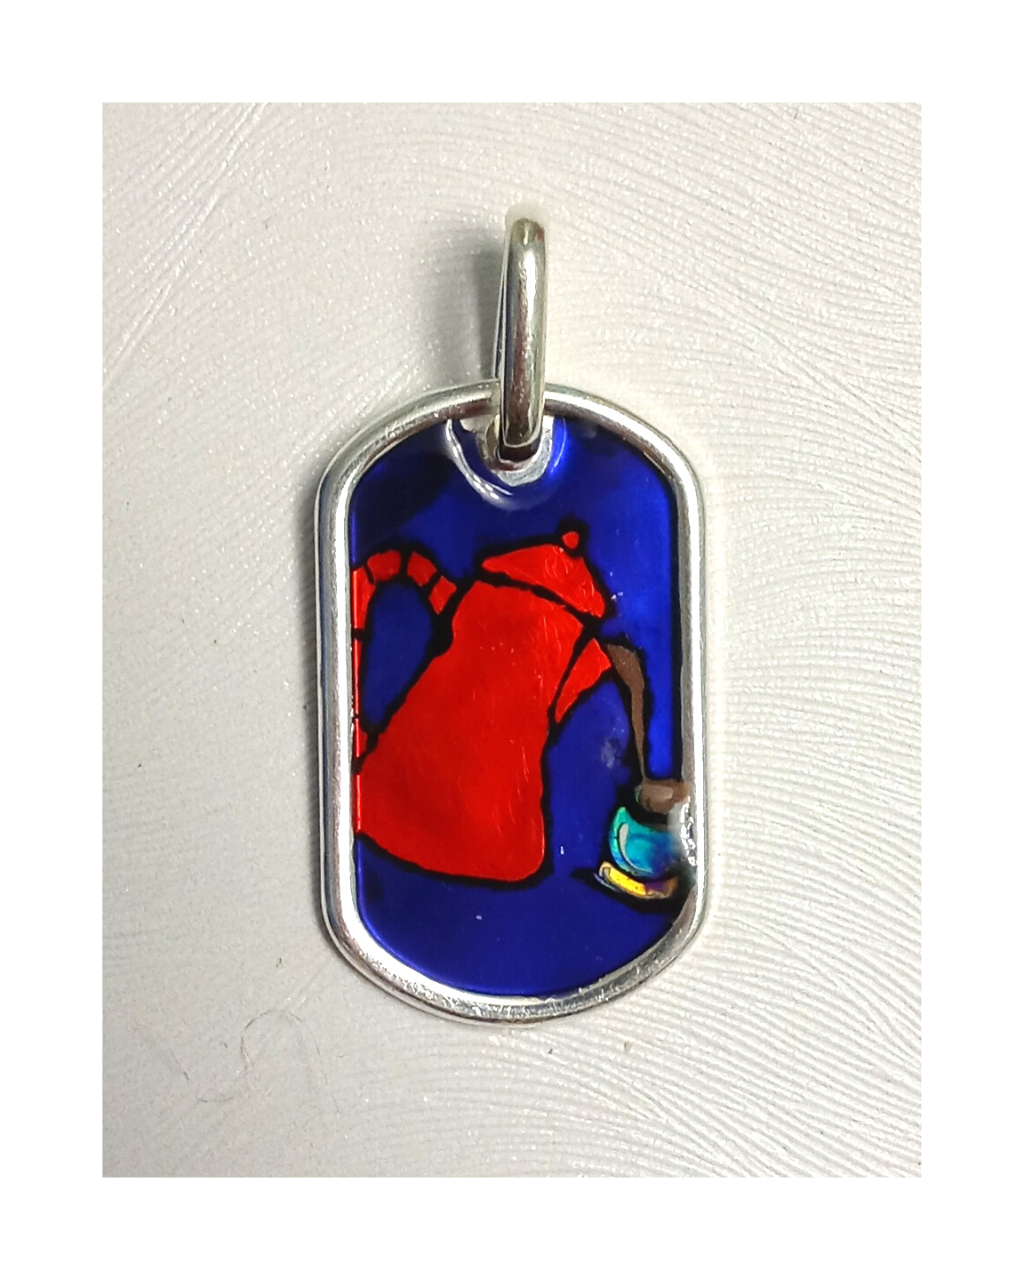 Louisville Iconic Sterling Exclusive Wearable Art Hand-enameled Dog Tag Pendant Design of Red Coffee Pot on Purple Background. Come With a Purple Purse KooLoop.,1 9/16"L X 3/4"W. ONE ONLY!